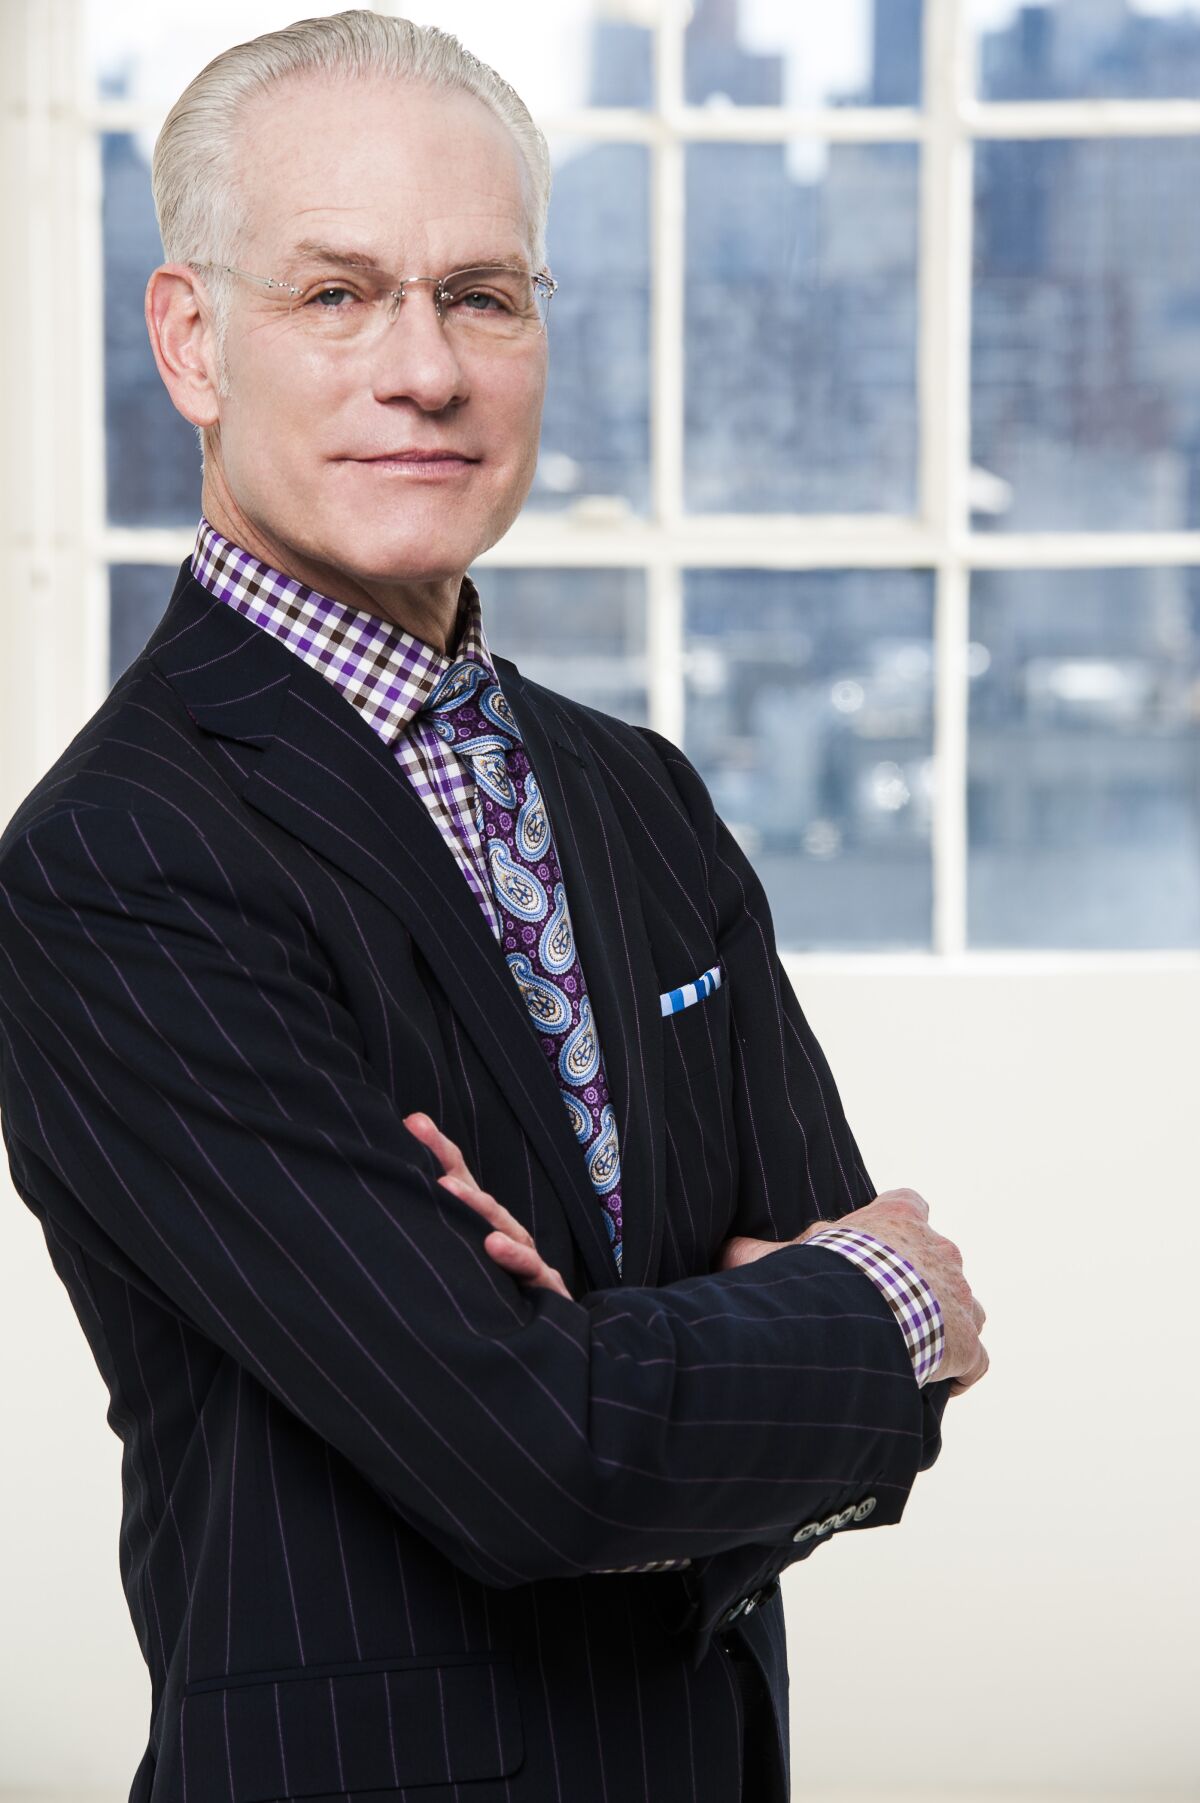 Jewish Family Services of San Diego presents “Making It Work: Life Lessons from Global Fashion Icon Tim Gunn” on April 29.